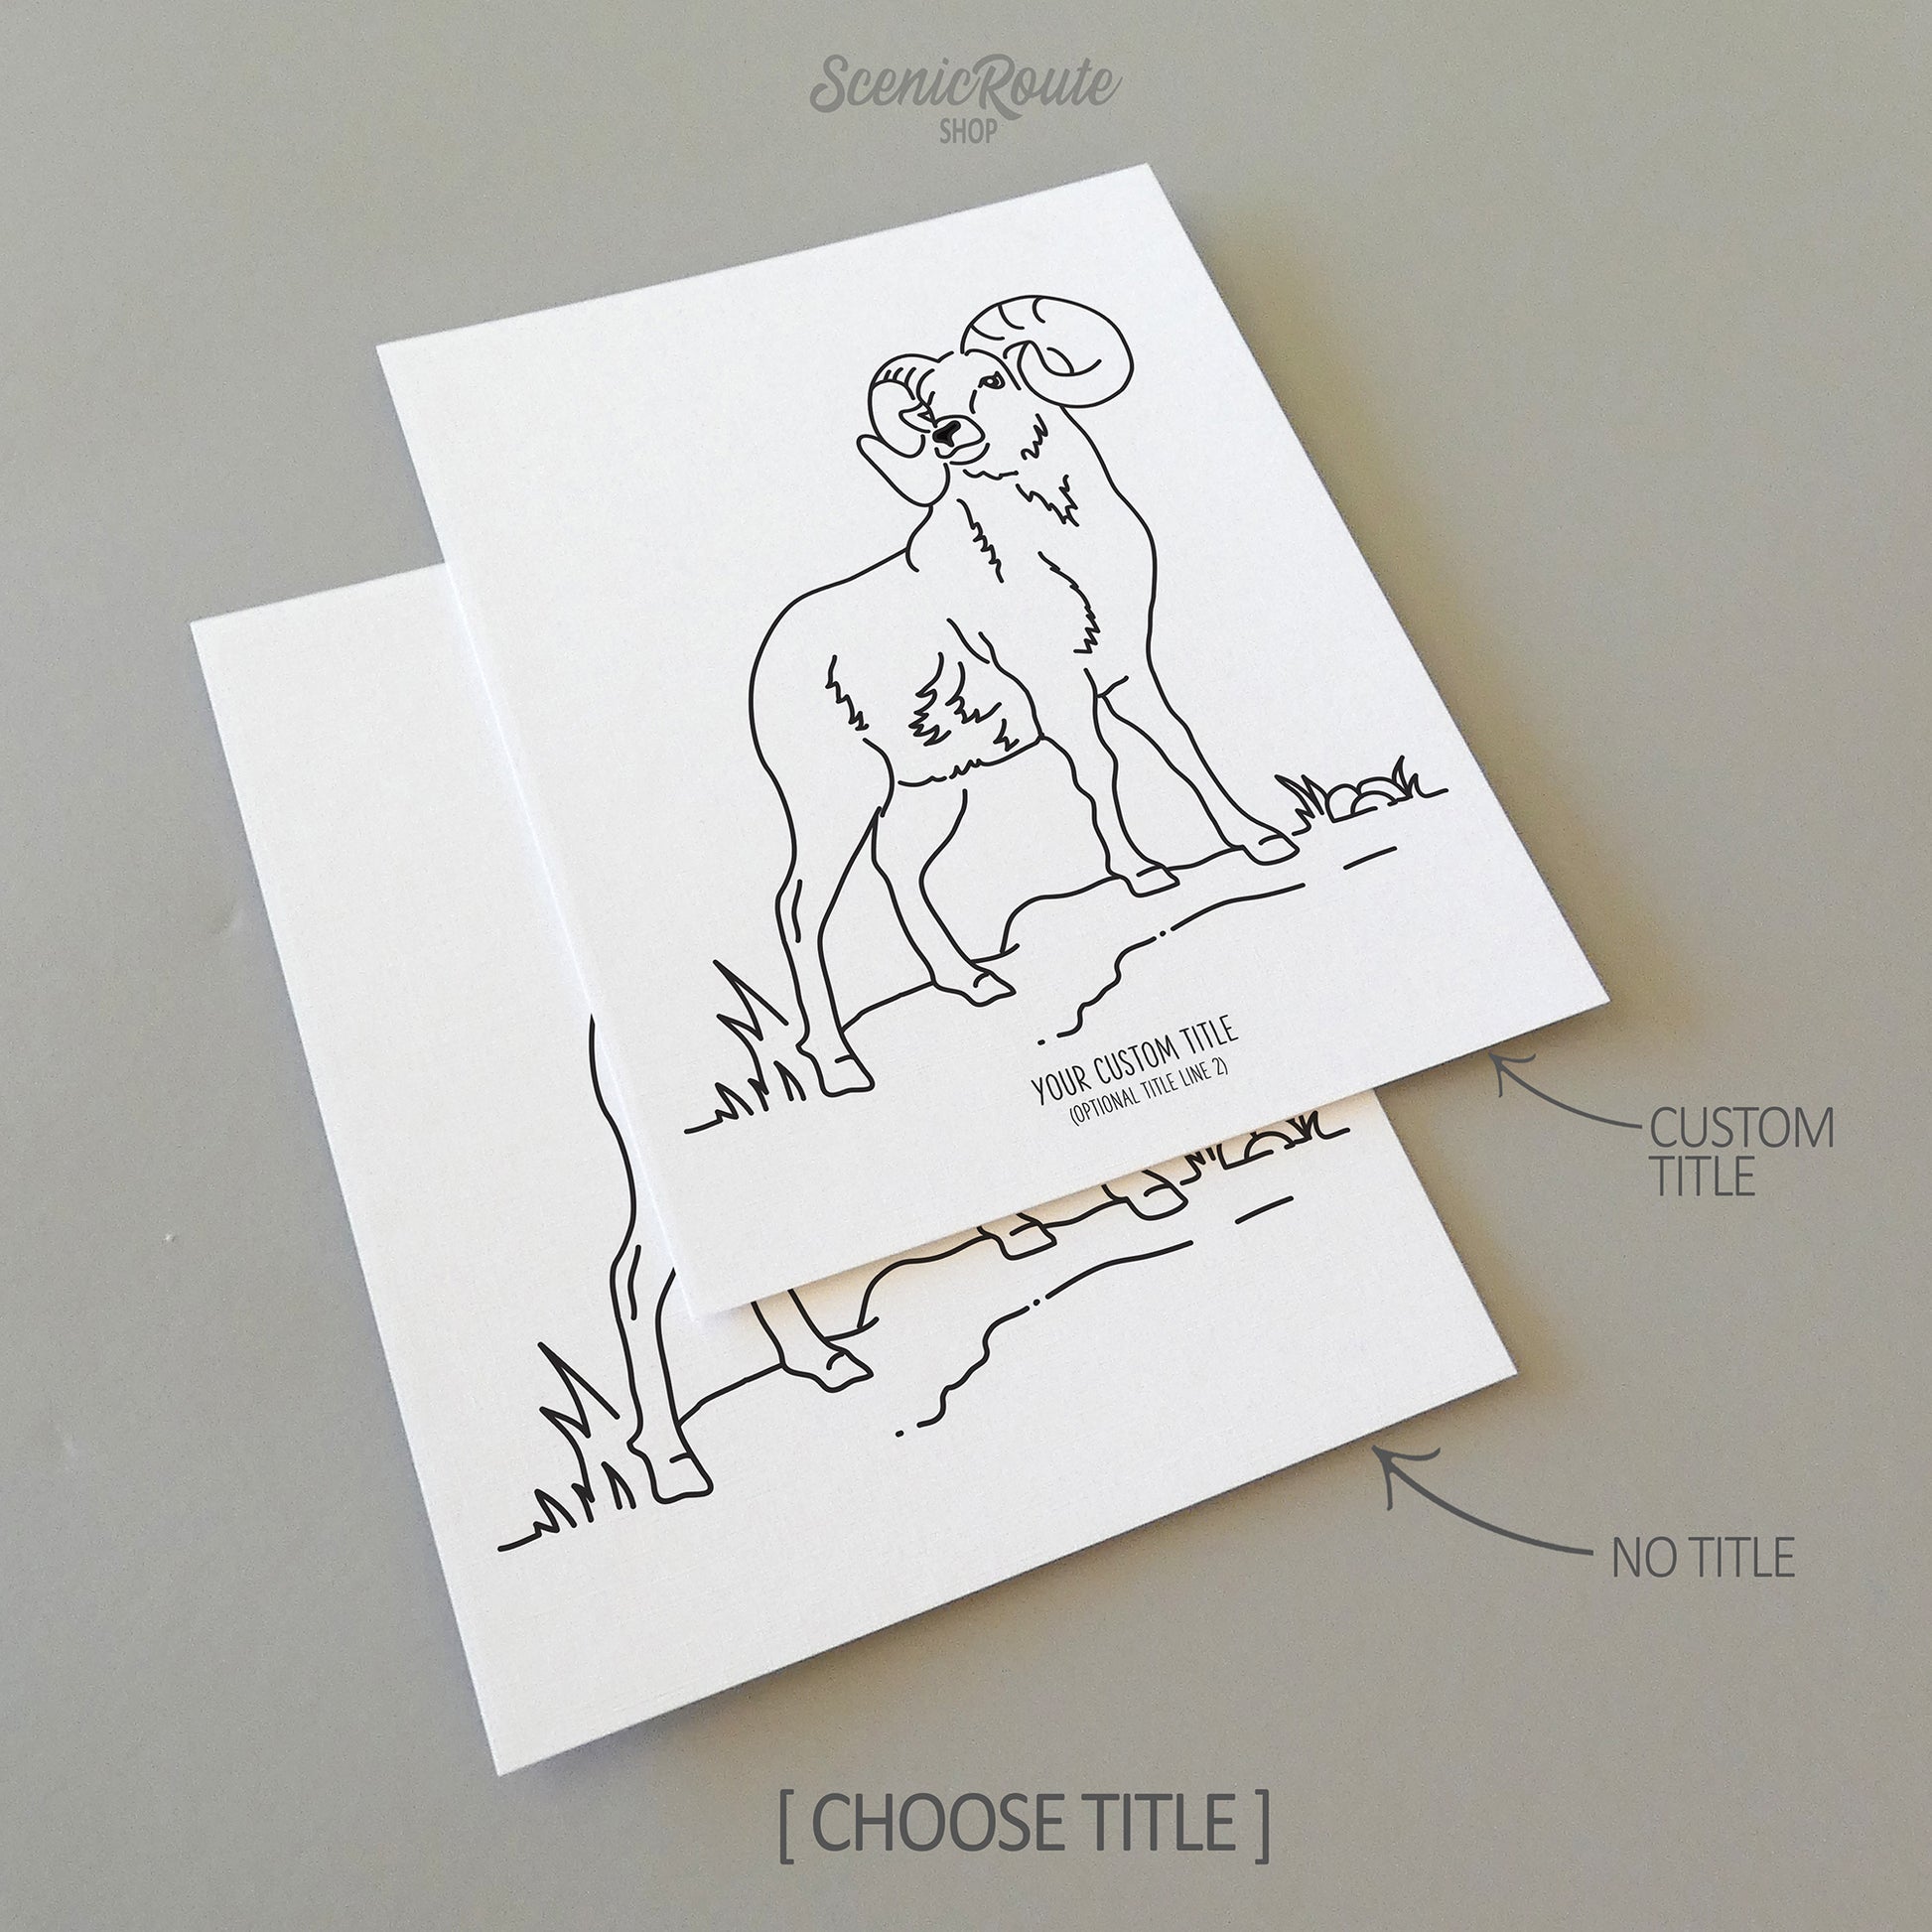 Two line art drawings of a Longhorn Sheep on white linen paper with a gray background.  The pieces are shown with “No Title” and “Custom Title” options for the available art print options.